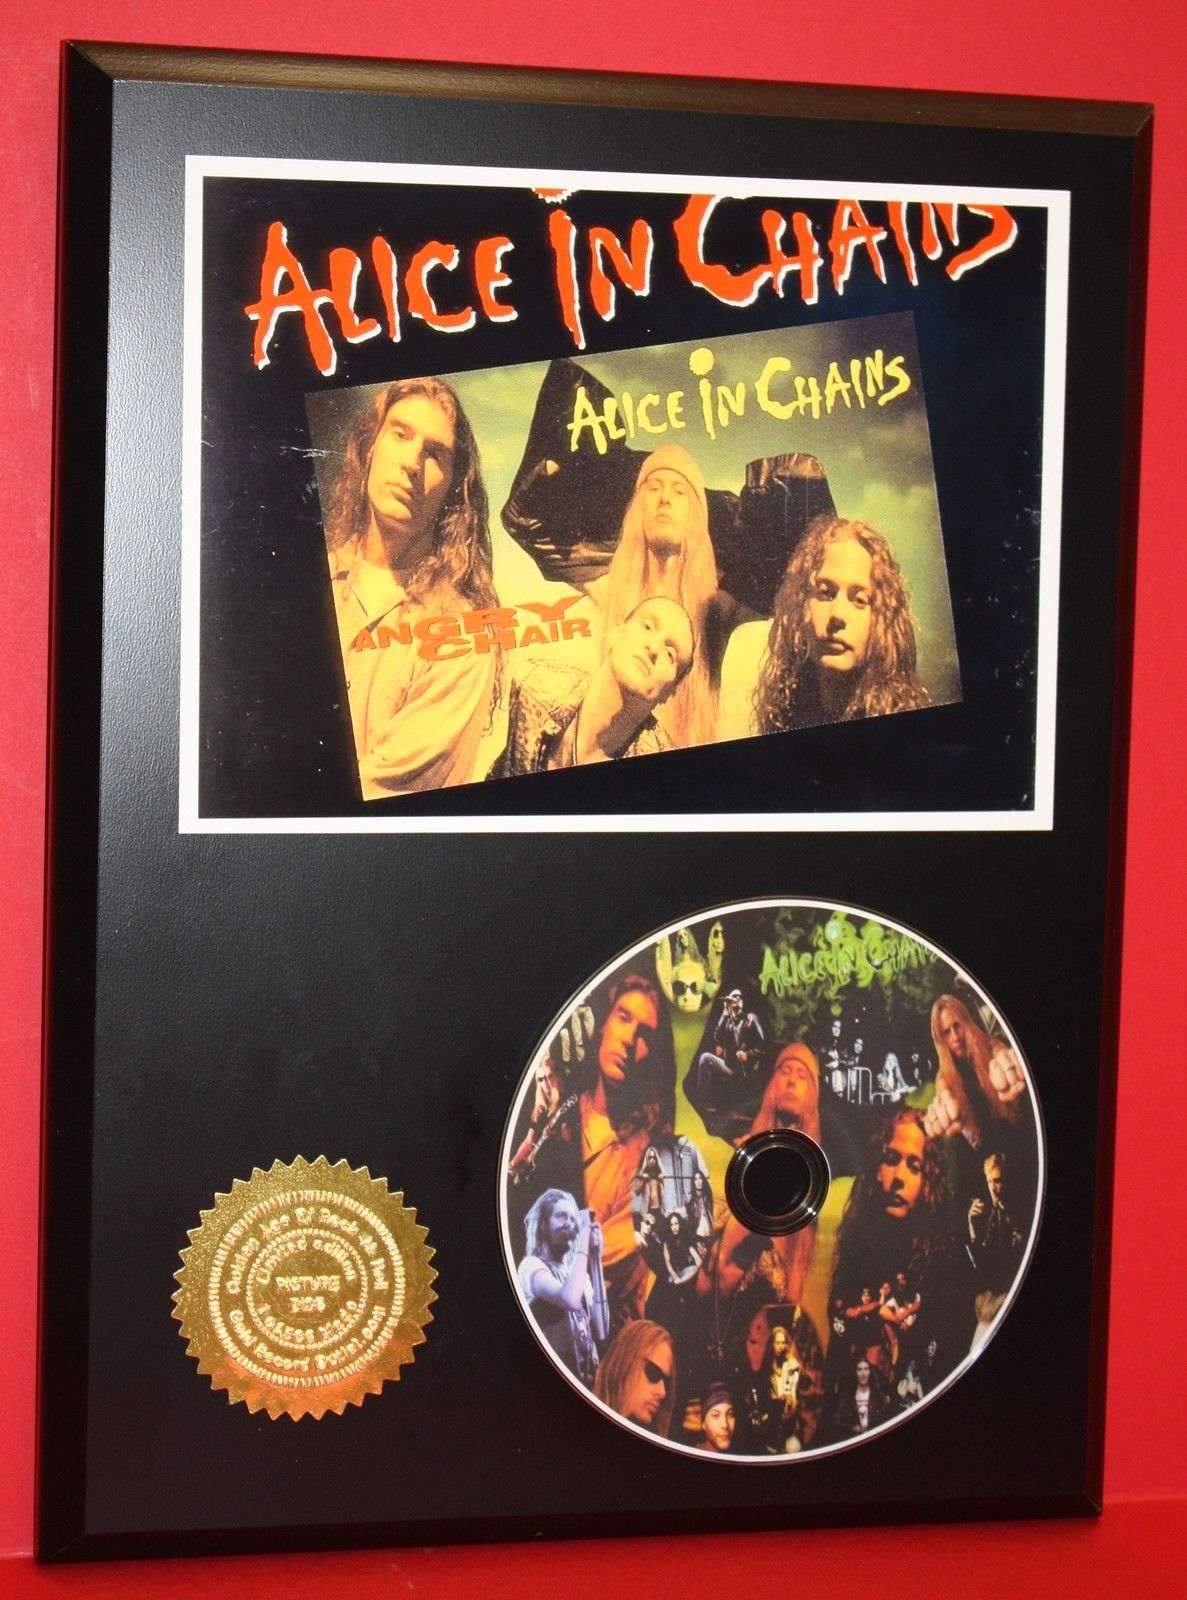 https://goldrecordoutlet.com/wp-content/uploads/imported/5/ALICE-IN-CHAINS-LIMITED-EDITION-PICTURE-CD-DISC-COLLECTIBLE-RARE-GIFT-WALL-ART-180895473875.jpg